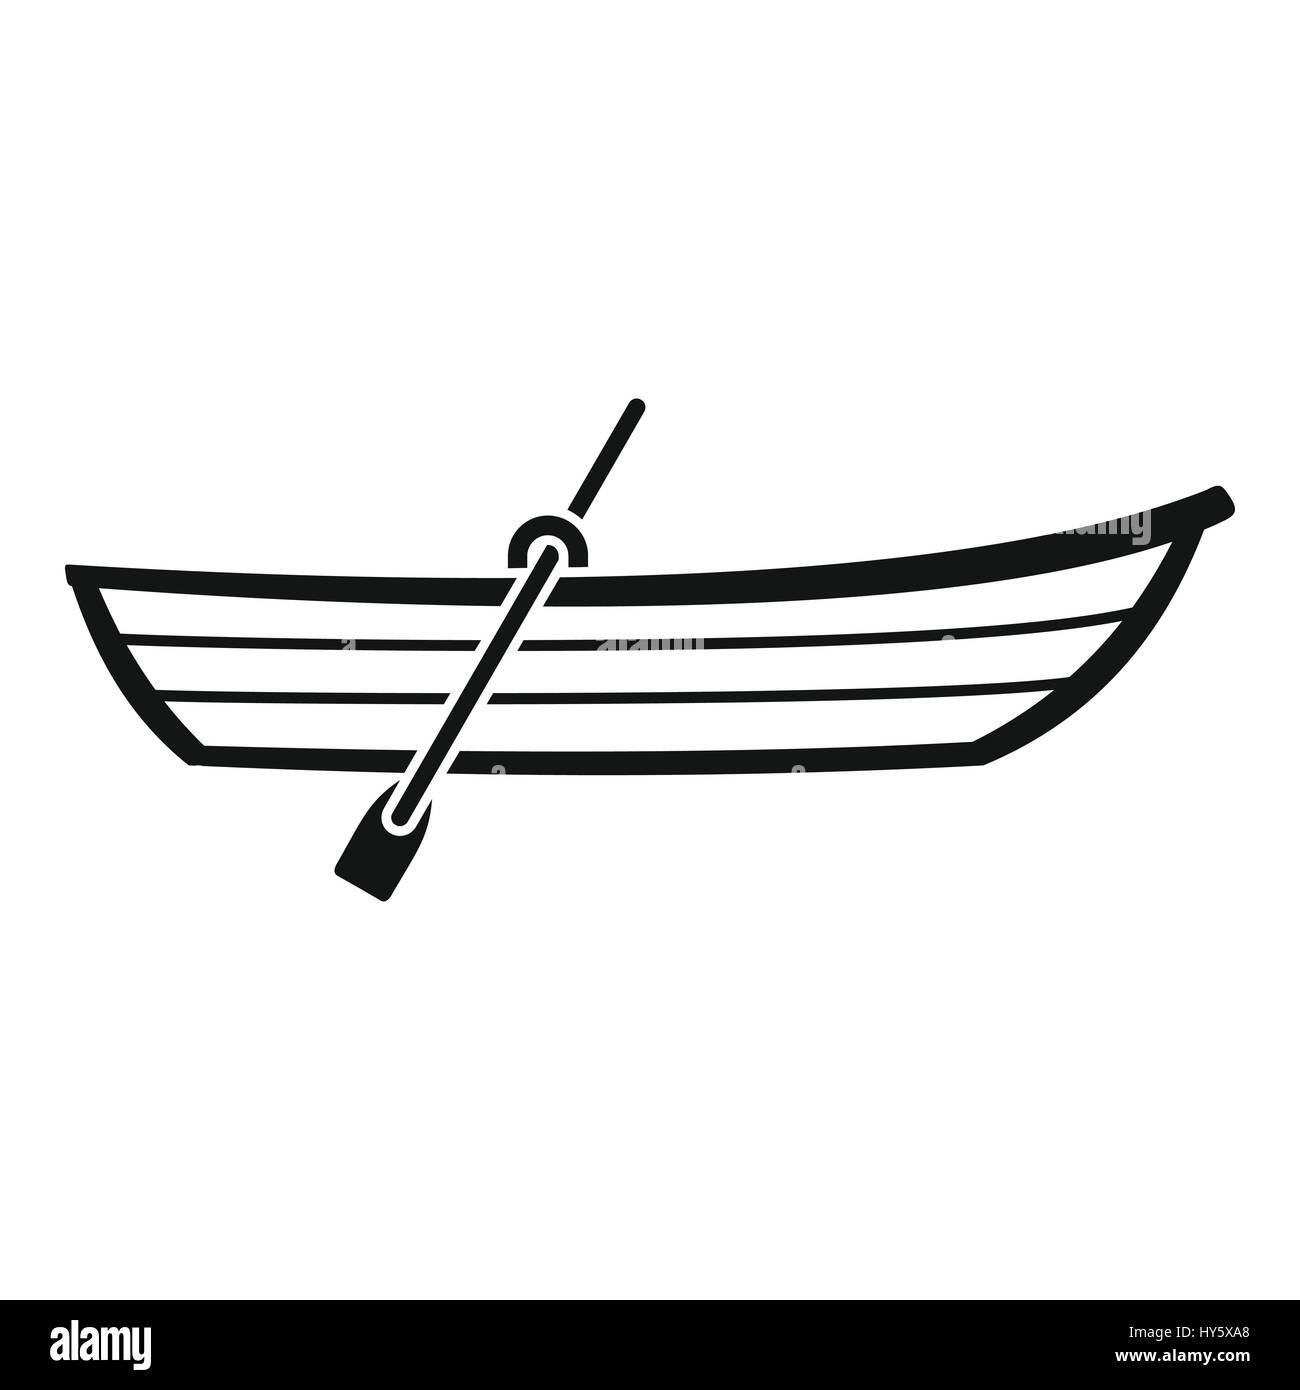 Learn How to Draw a Simple Boat for Kids Boats for Kids Step by Step   Drawing Tutorials